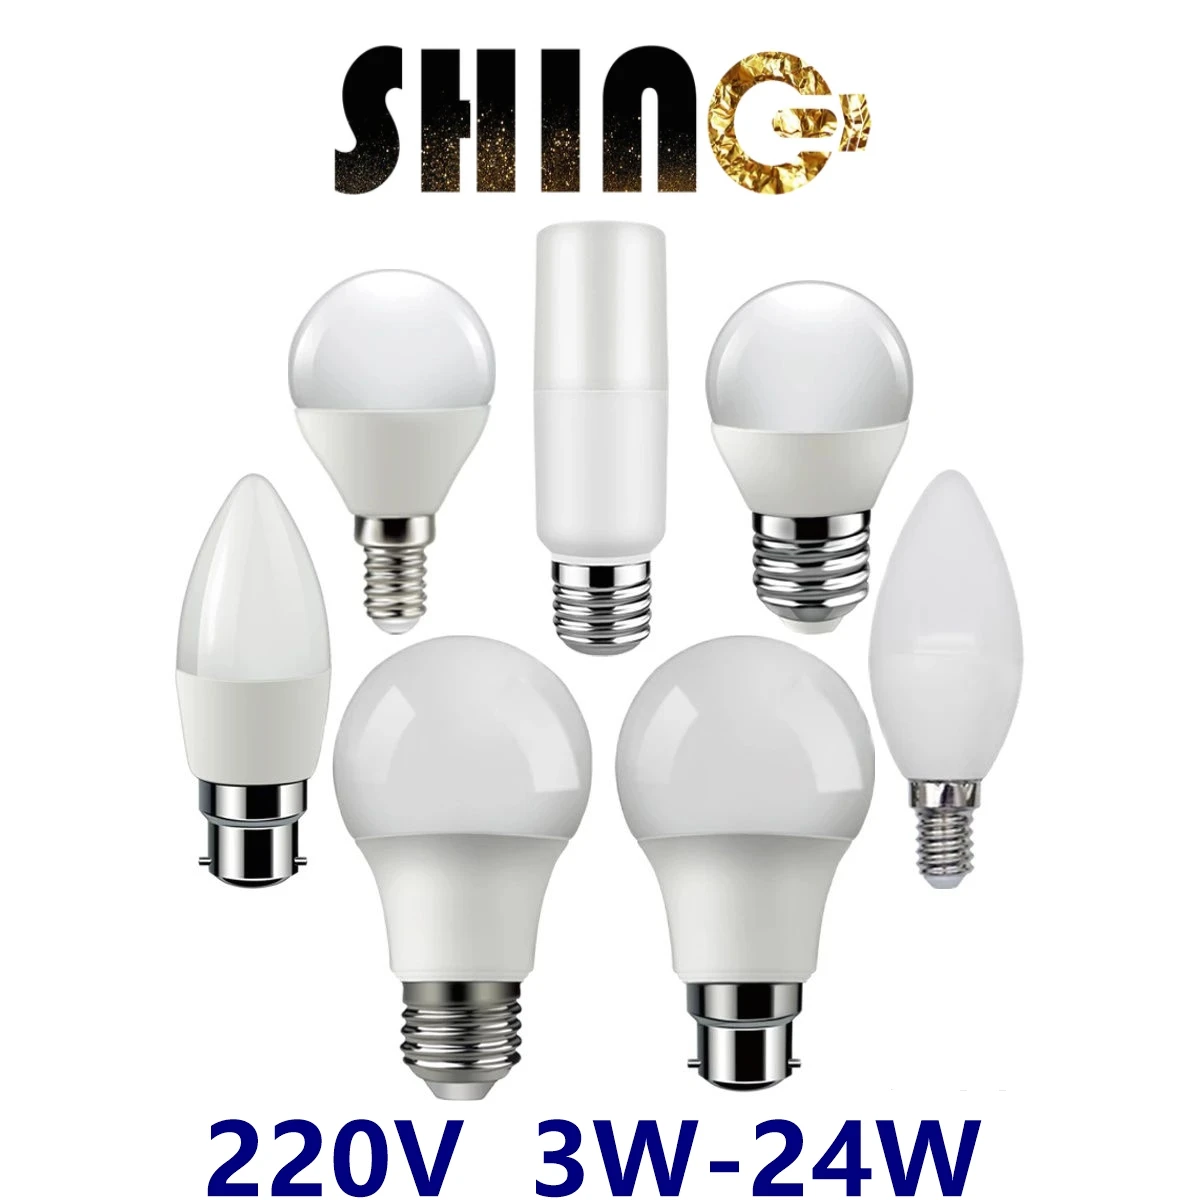 

2022 Focos High Brightness Led Bulb 3w-24w E14 E27 B22 3000K 4000K 6000K Lamp With Ce Rohs For Home Office Interior Decoration